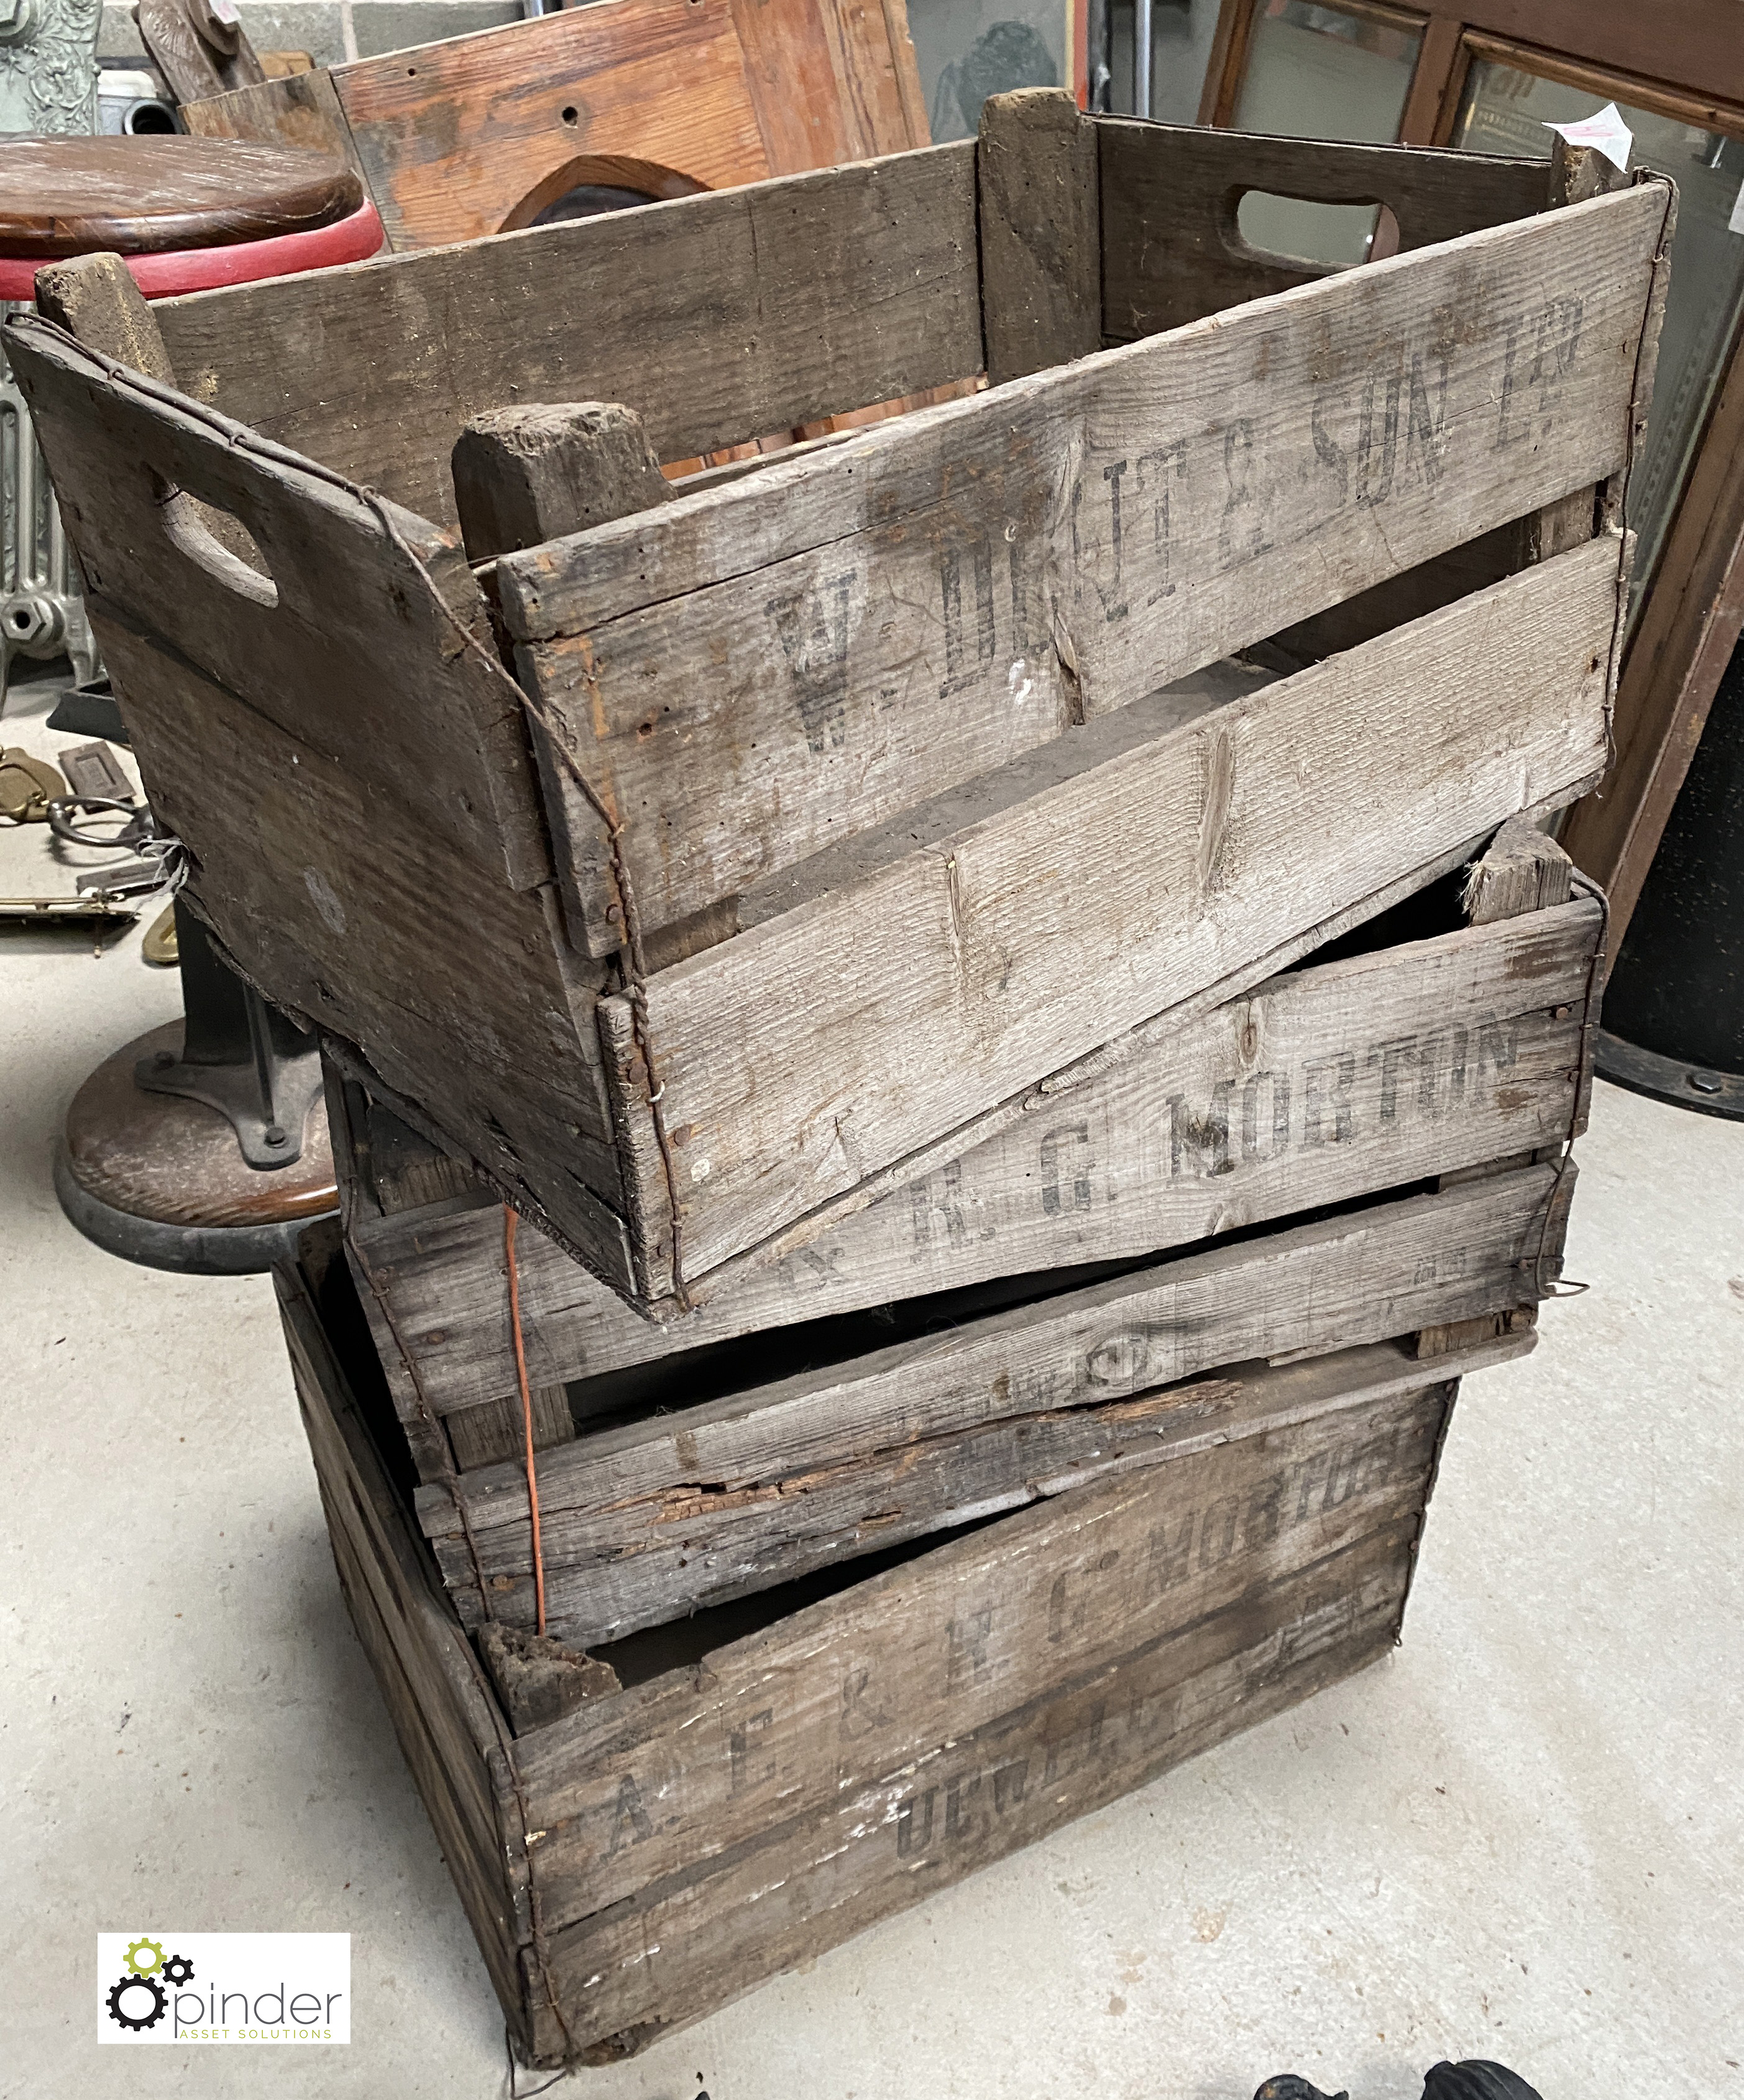 3 vintage wooden Dairy Crates, 550mm long x 370mm wide x 270mm deep